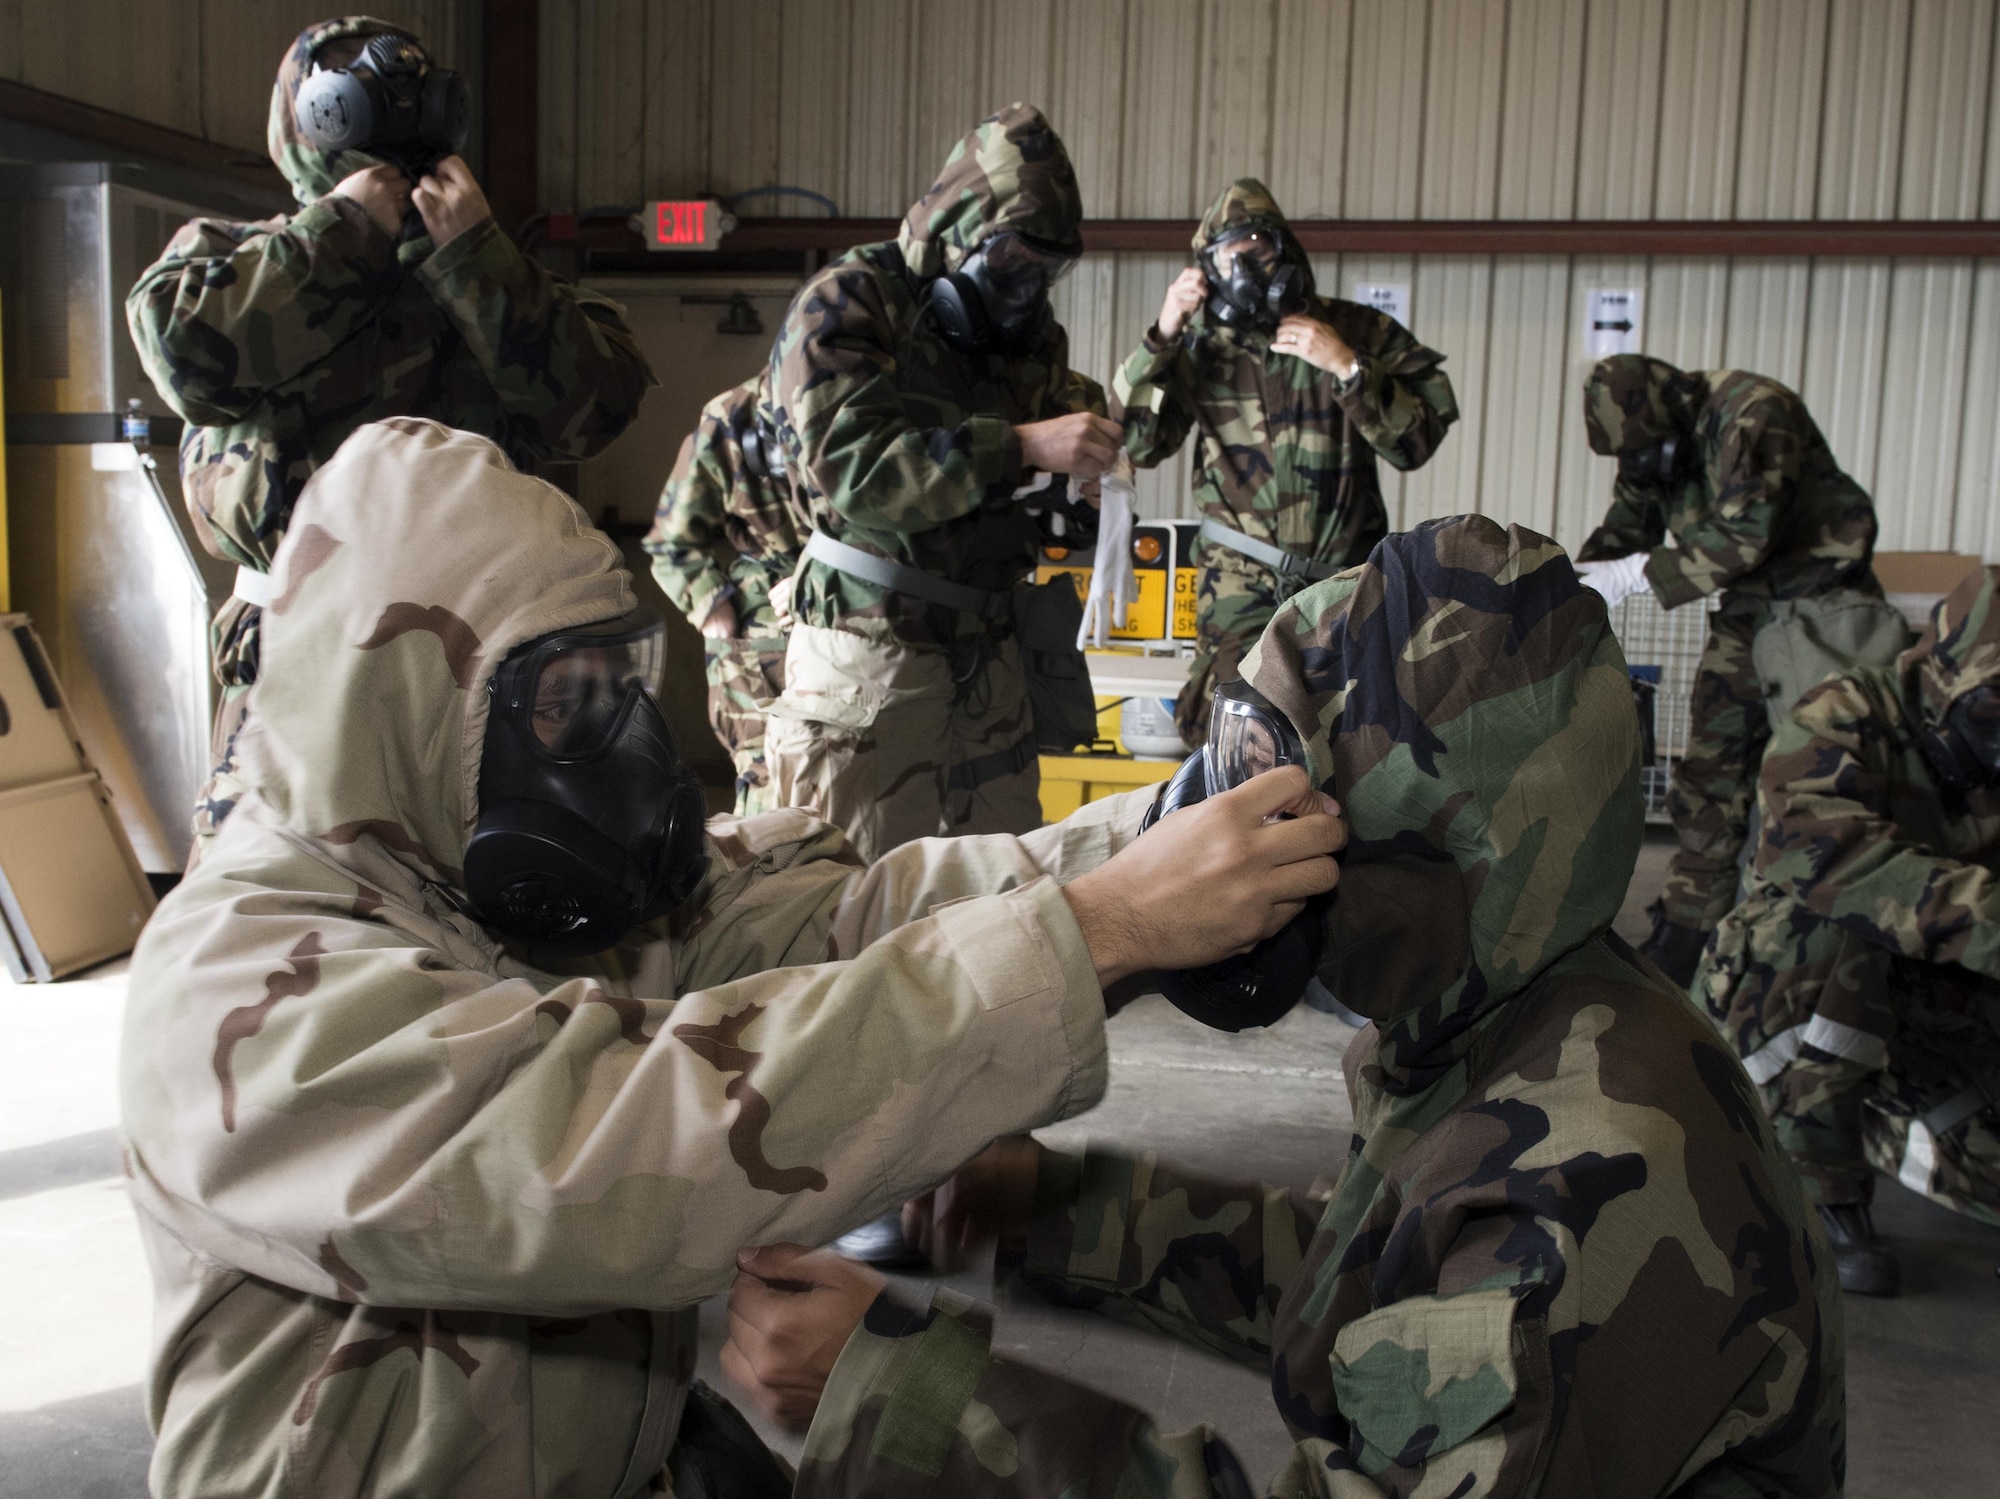 U. S. Air Force Airmen check each other’s protective equipment to ensure a proper seal during a chemical, biological, radiological and nuclear defense survival skills training course at Travis Air Force Base, Calif., Sep. 21, 2017. Buddy checks are designed to ensure Airmen have properly assembled their mission-oriented protective posture gear. (U.S. Air Force photo by Heide Couch)